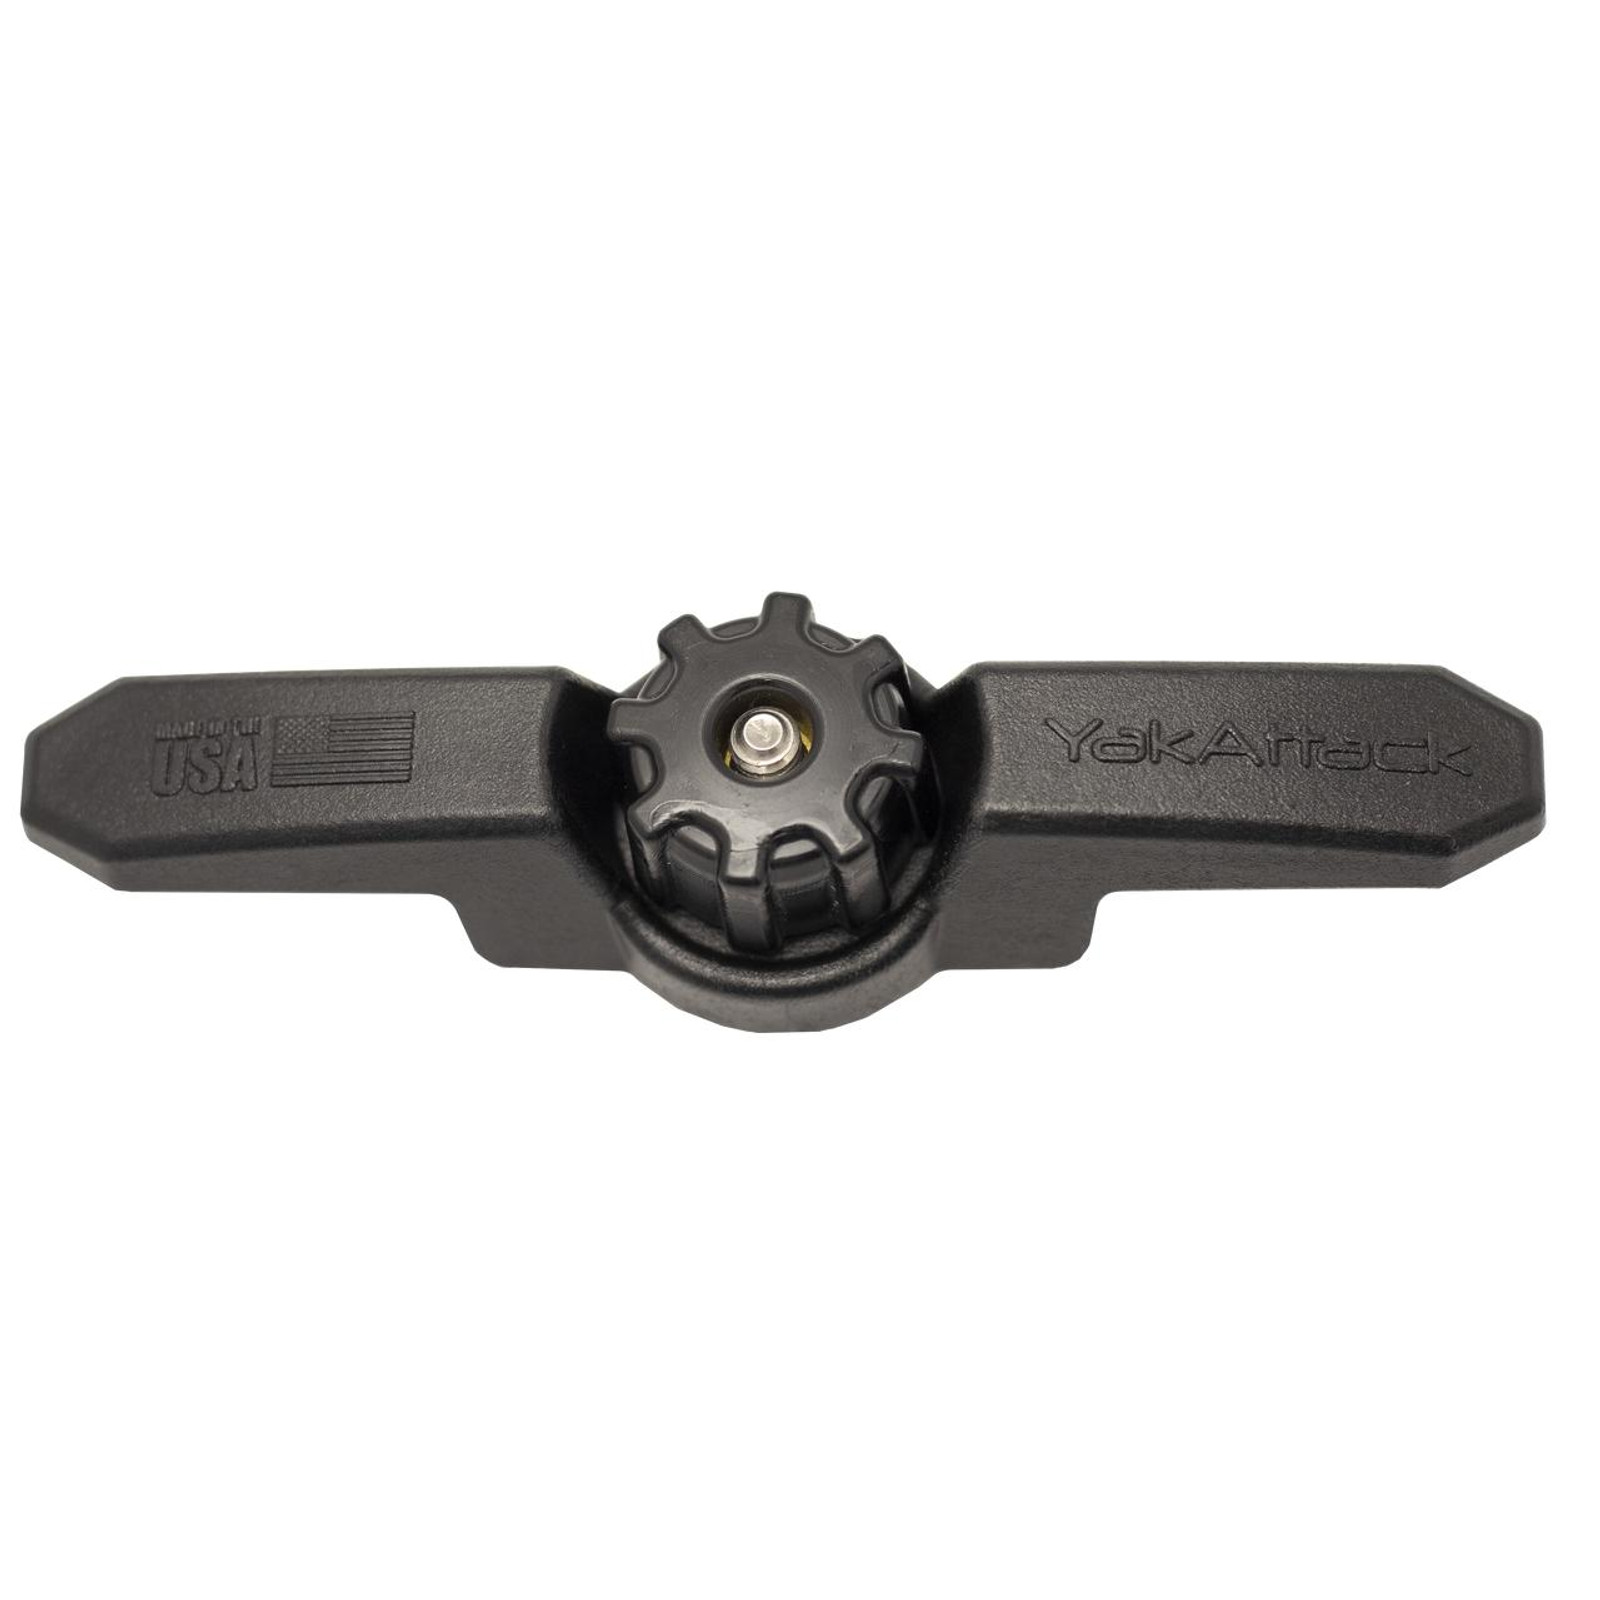 YakAttack GT Cleat XL, Track Mount Line Cleat AMS-1013